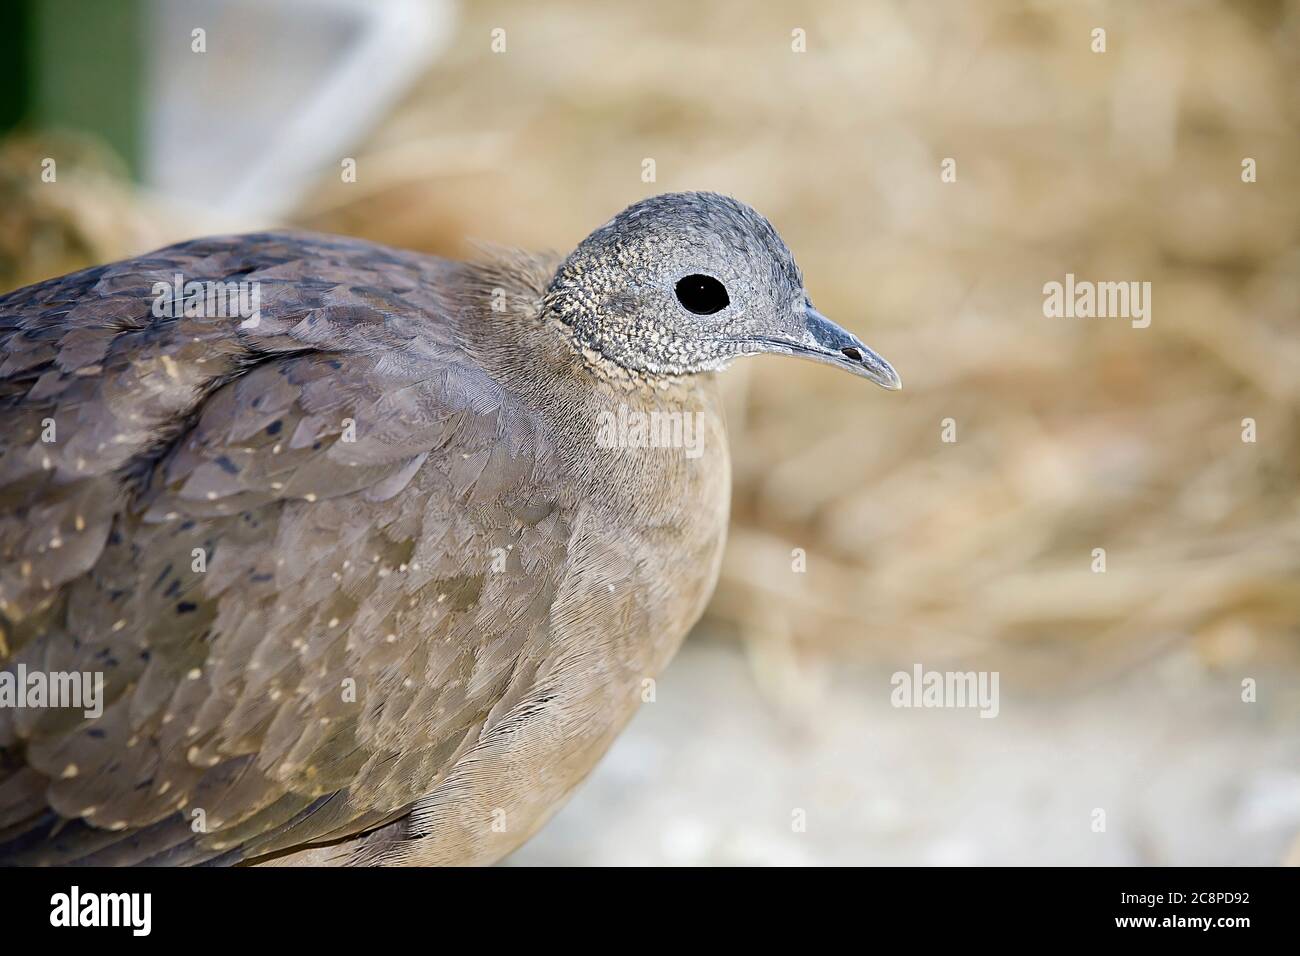 Macuco, the solitary tinamou (Tinamus solitarius) is a species of paleognath ground bird. This species is native to Atlantic forest of eastern Brazil. Stock Photo